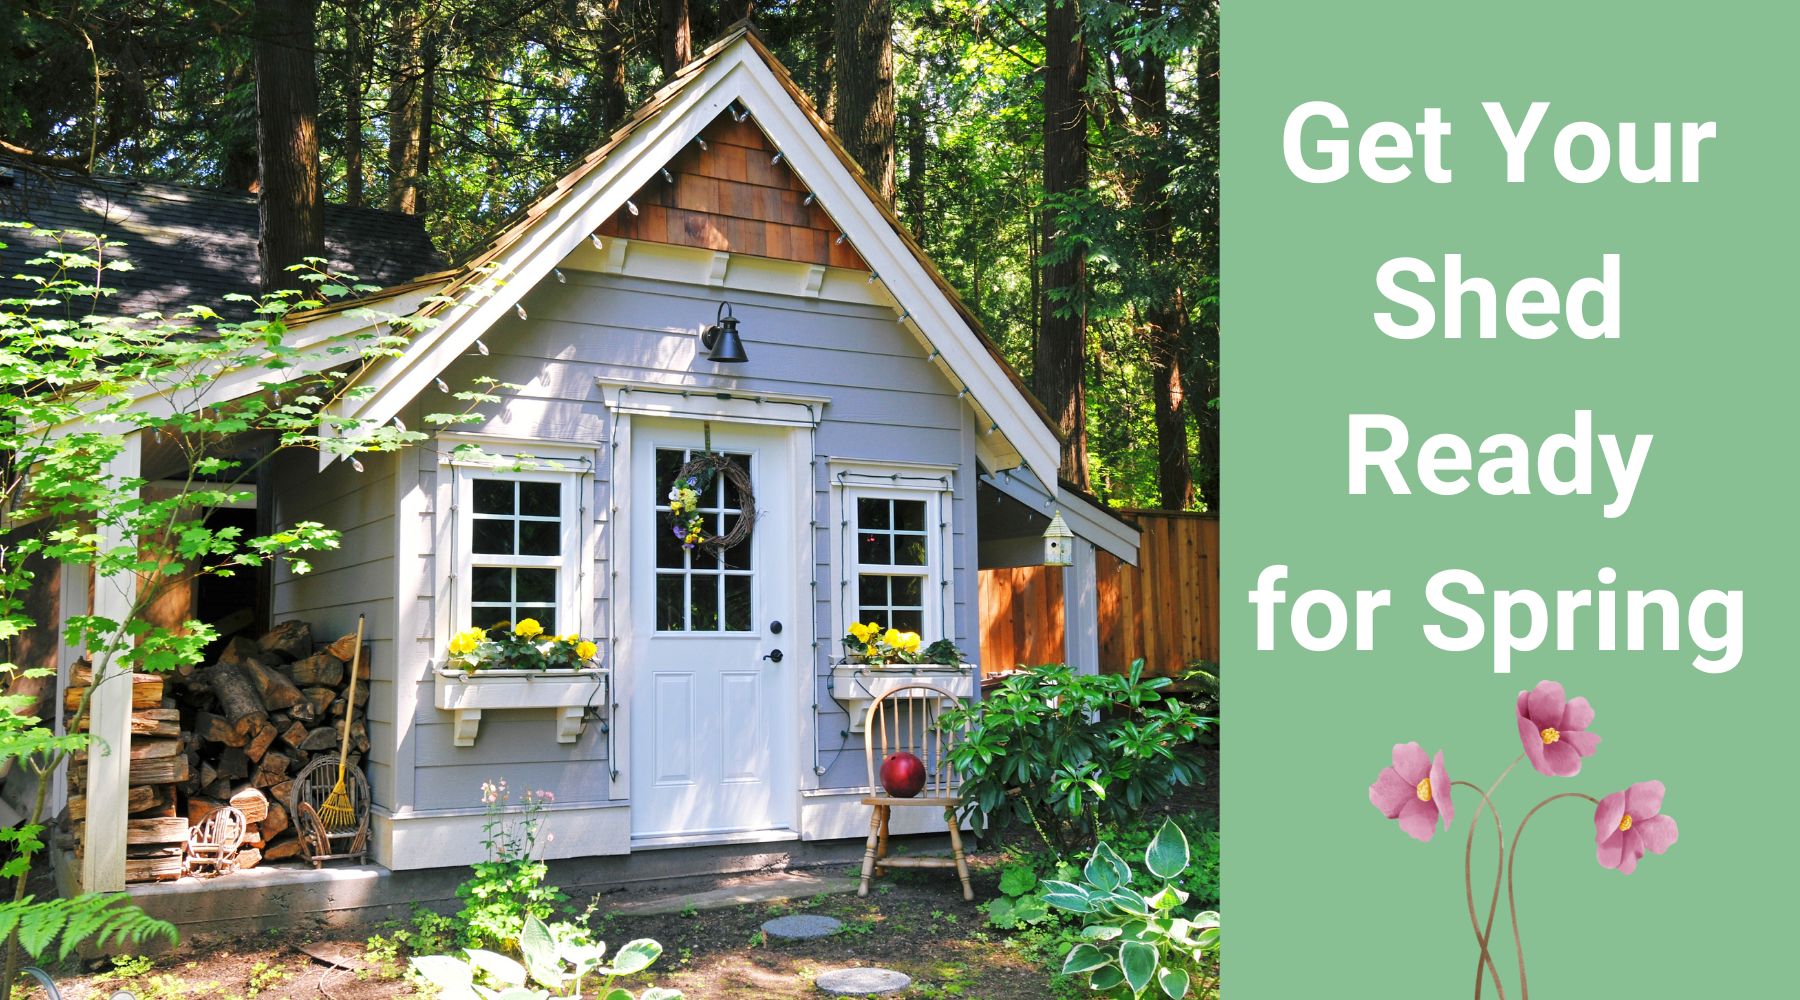 How to Inspect and Replace Worn-Out Shed Parts After Winter